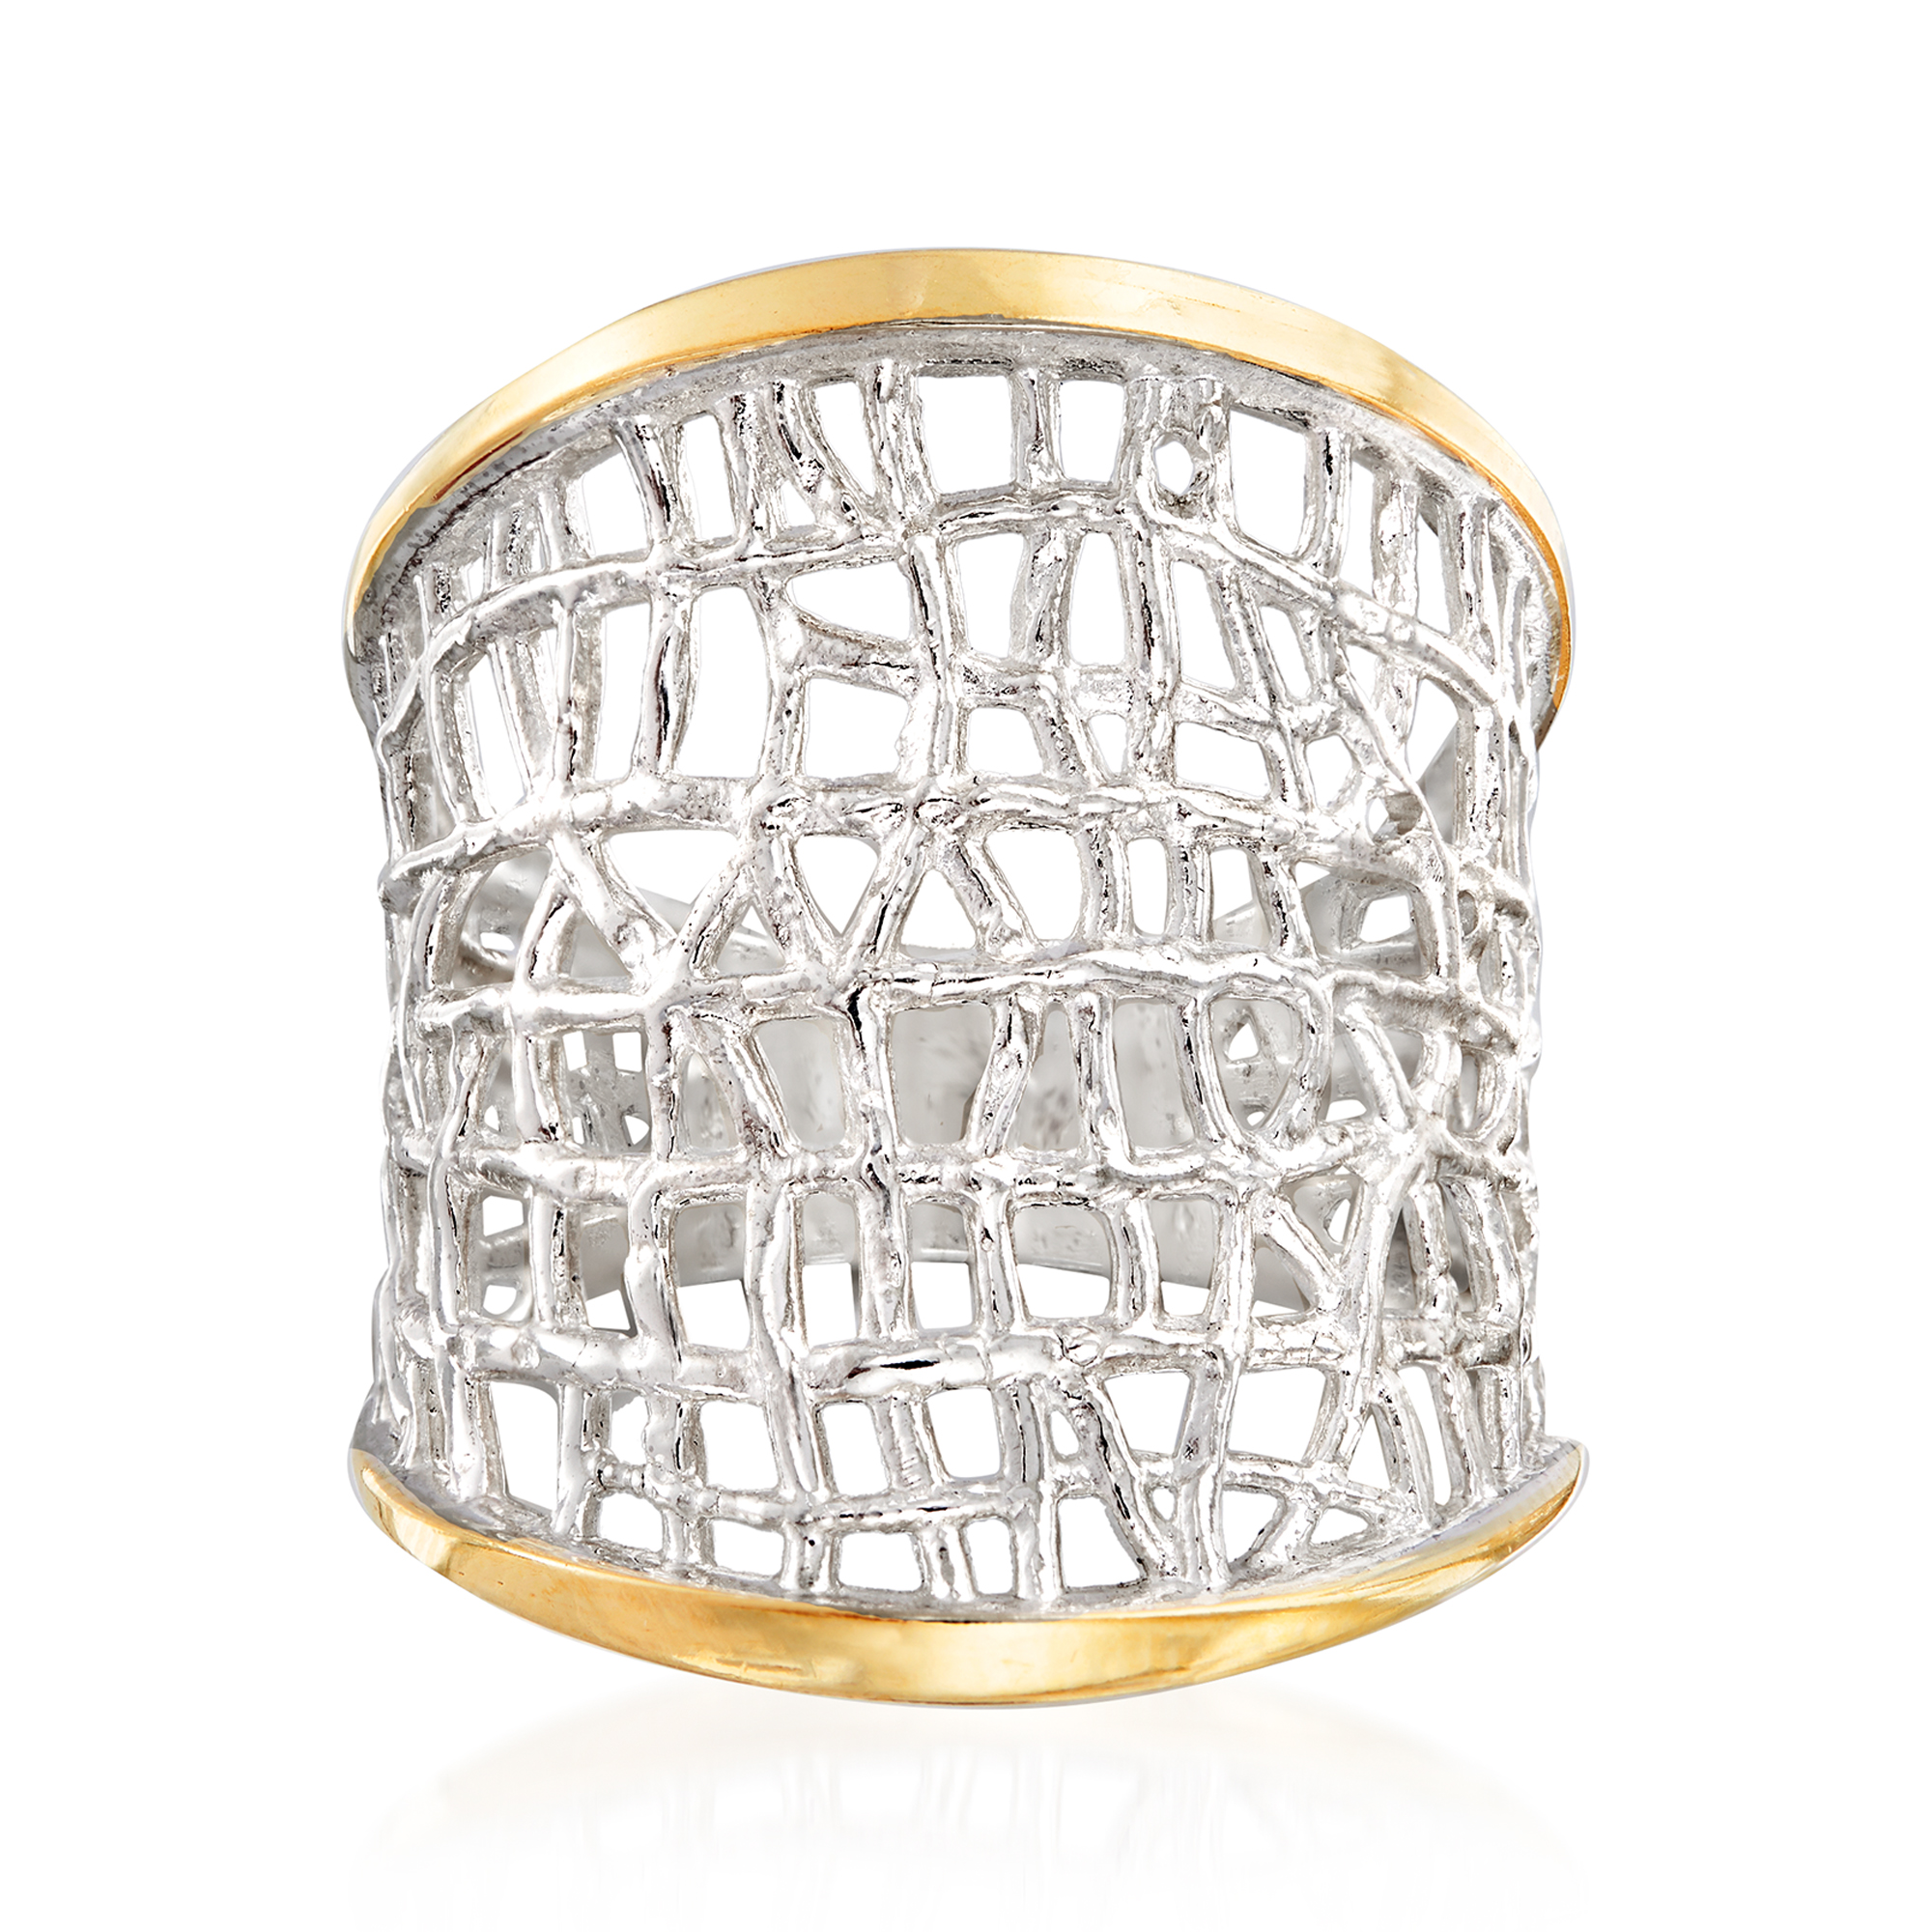 Sterling Silver and 14kt Yellow Gold Free-Form Lattice Ring | Ross-Simons